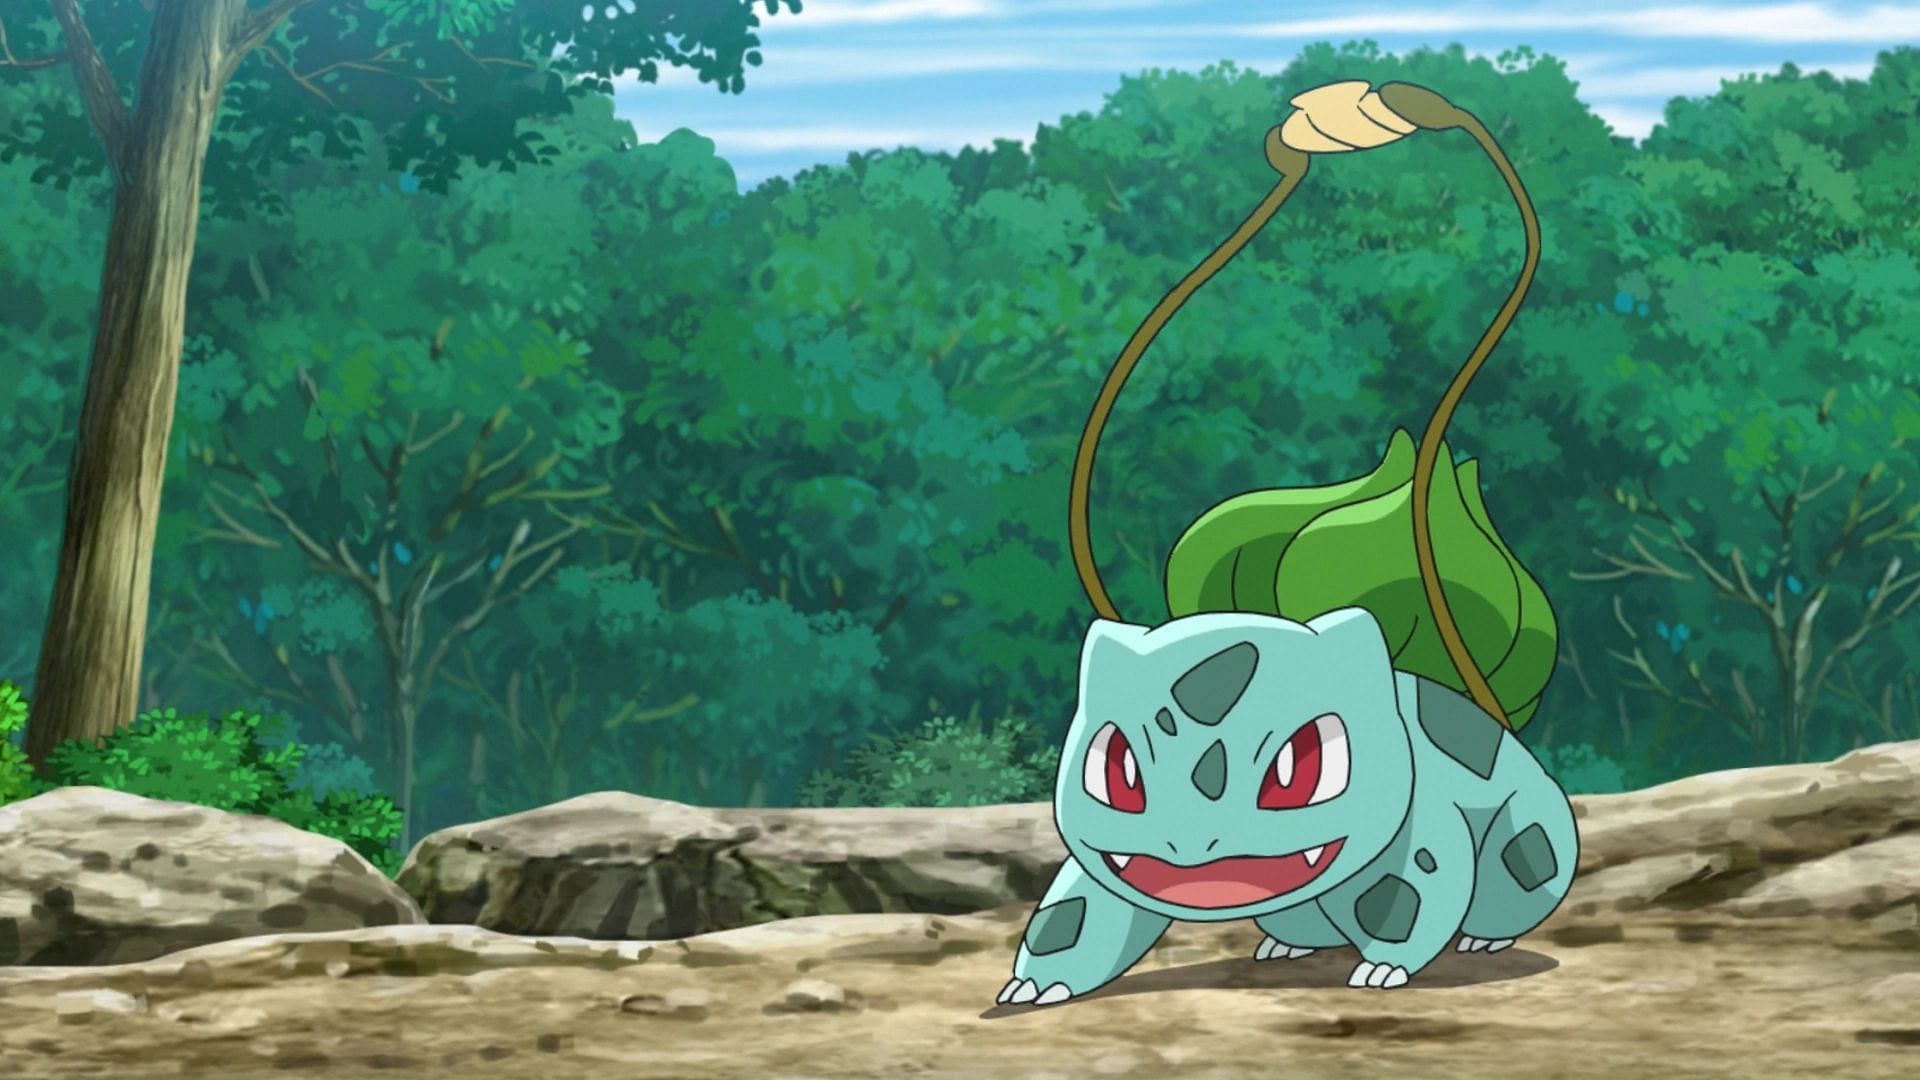 Bulbasaur as it appears in the anime (Image via The Pokemon Company)